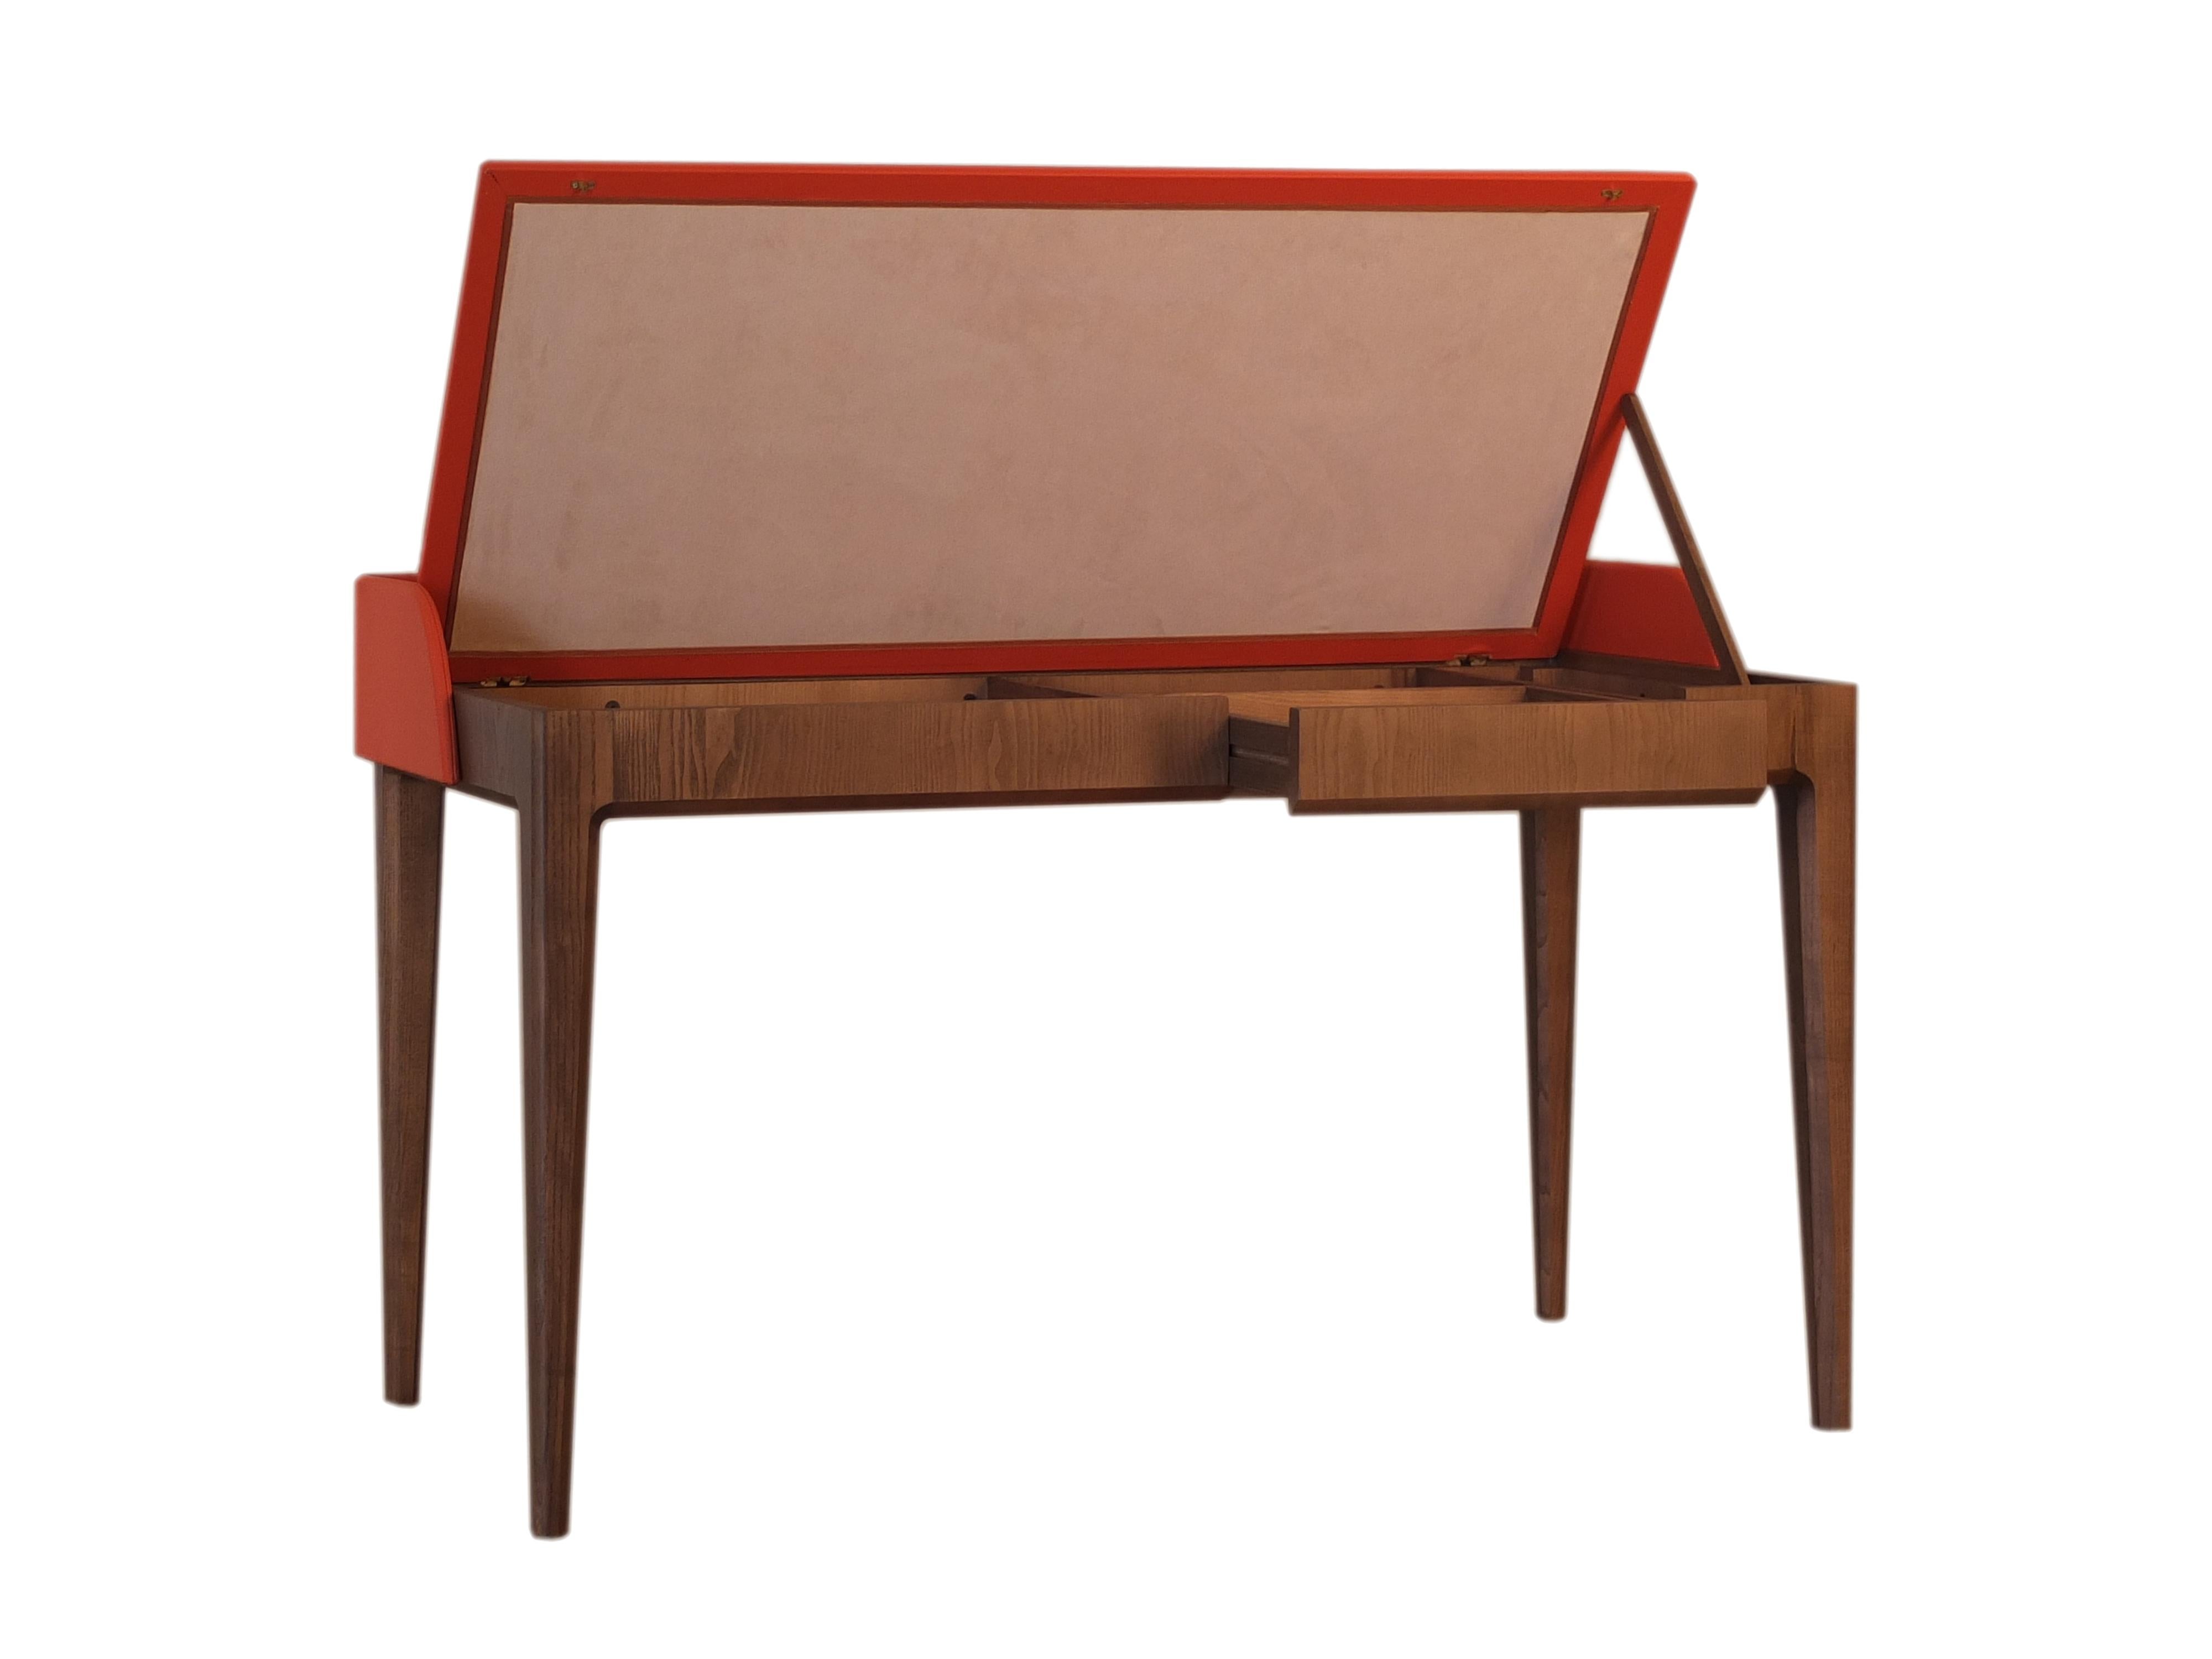 Contemporary Desk Made of Ashwood with Leather Flapping Top, by Morelato 2